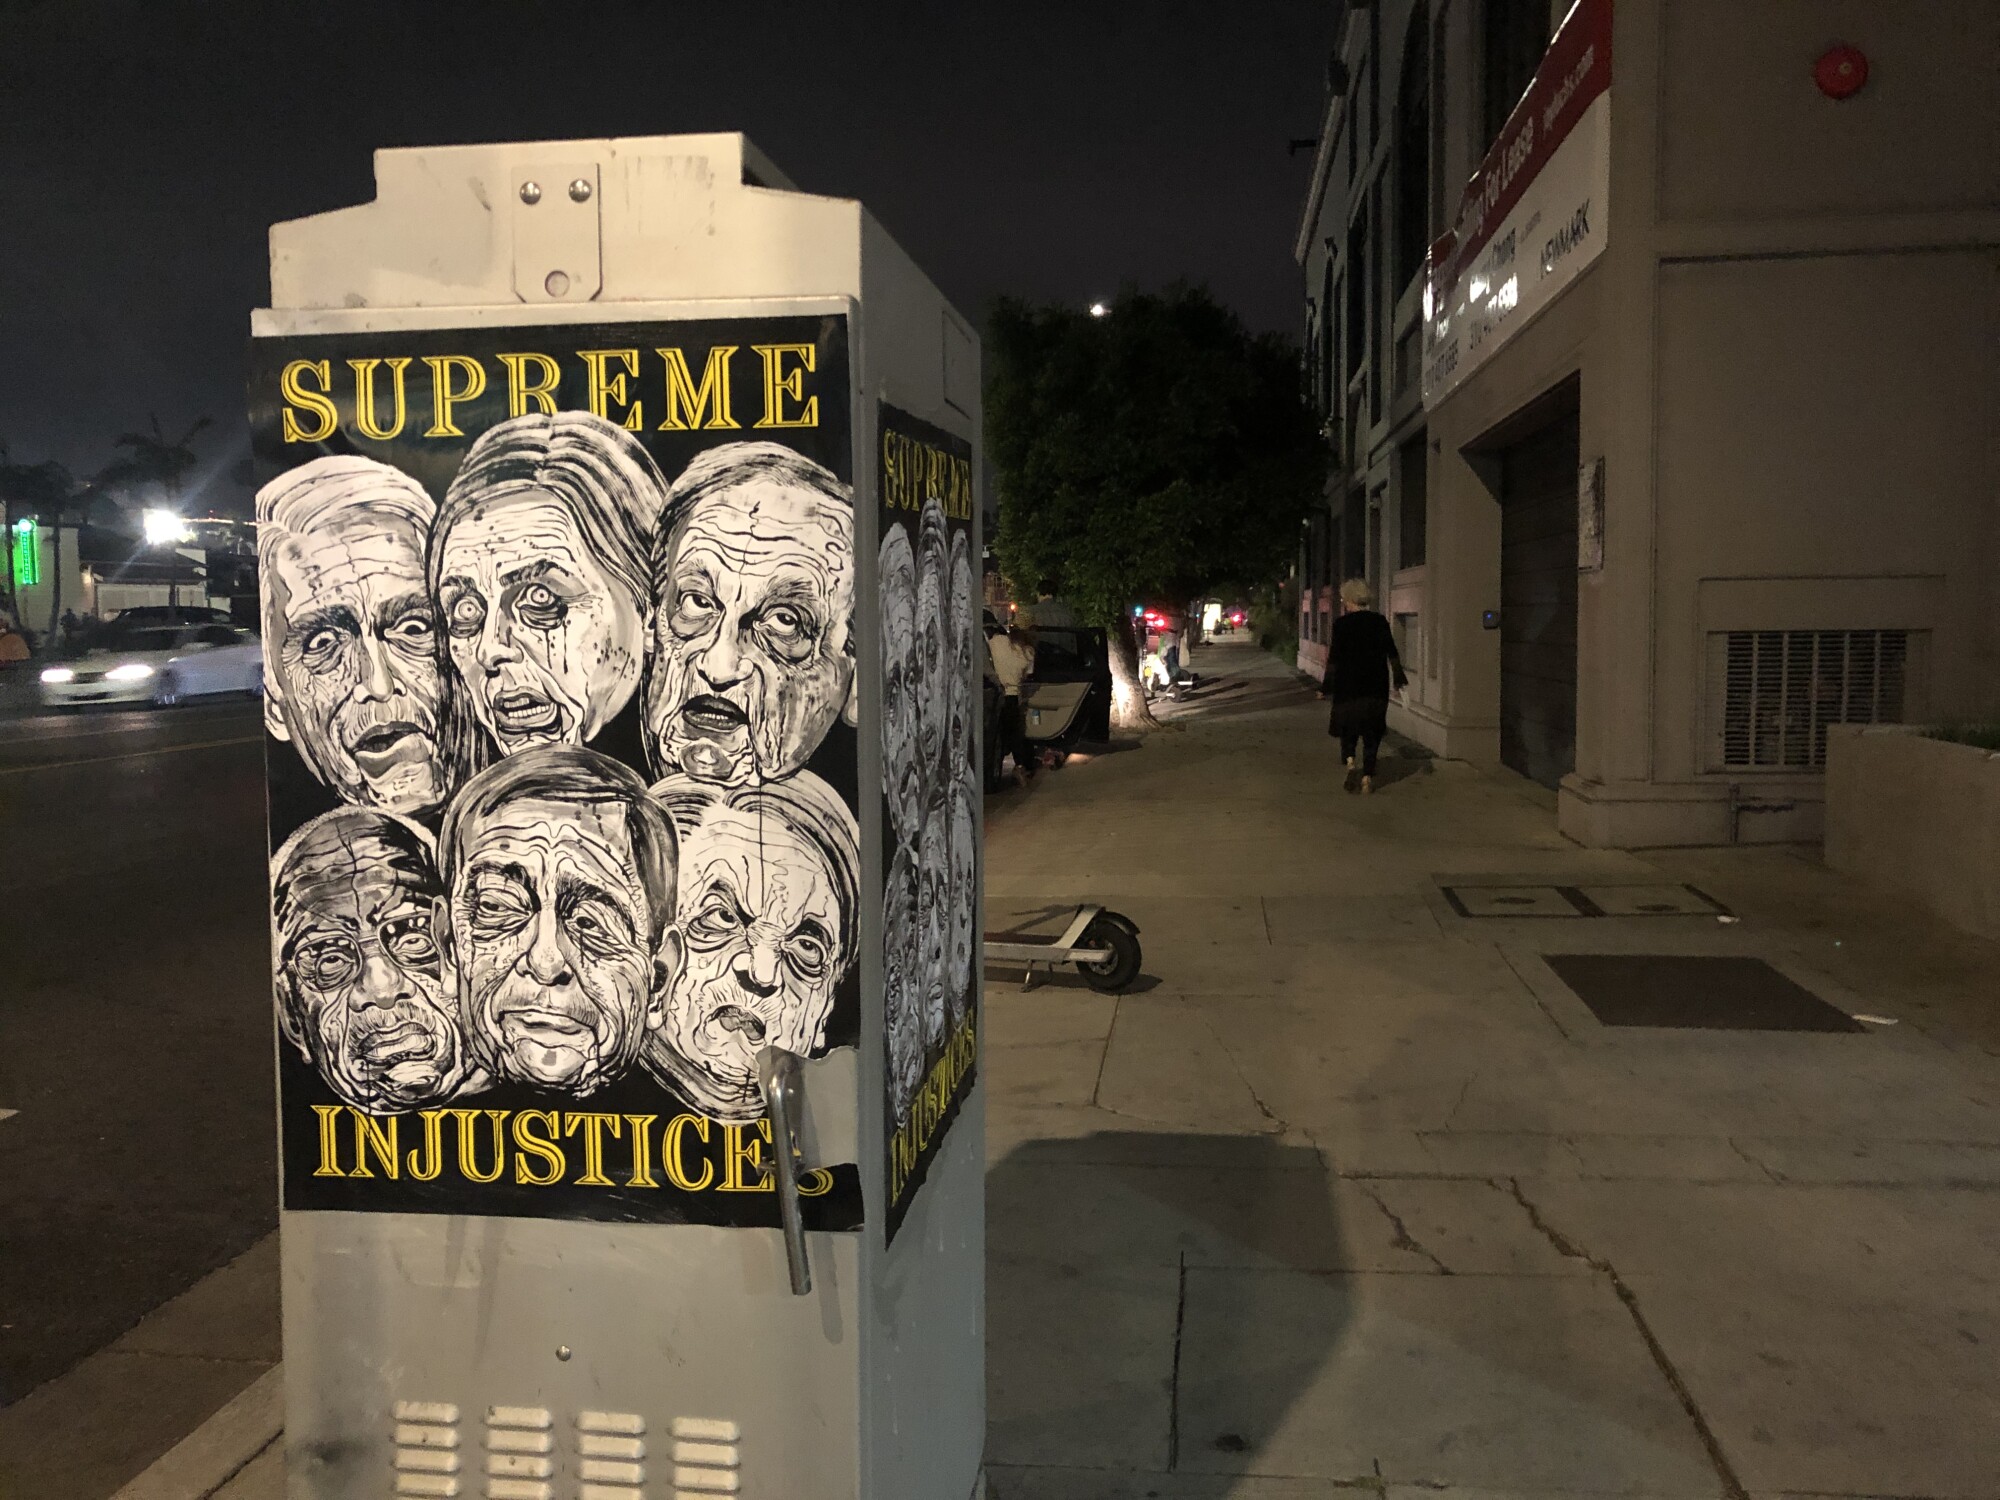 A poster that shows six members of the Supreme Court  that overturned Roe v. Wade, pasted to an electrical box at night.